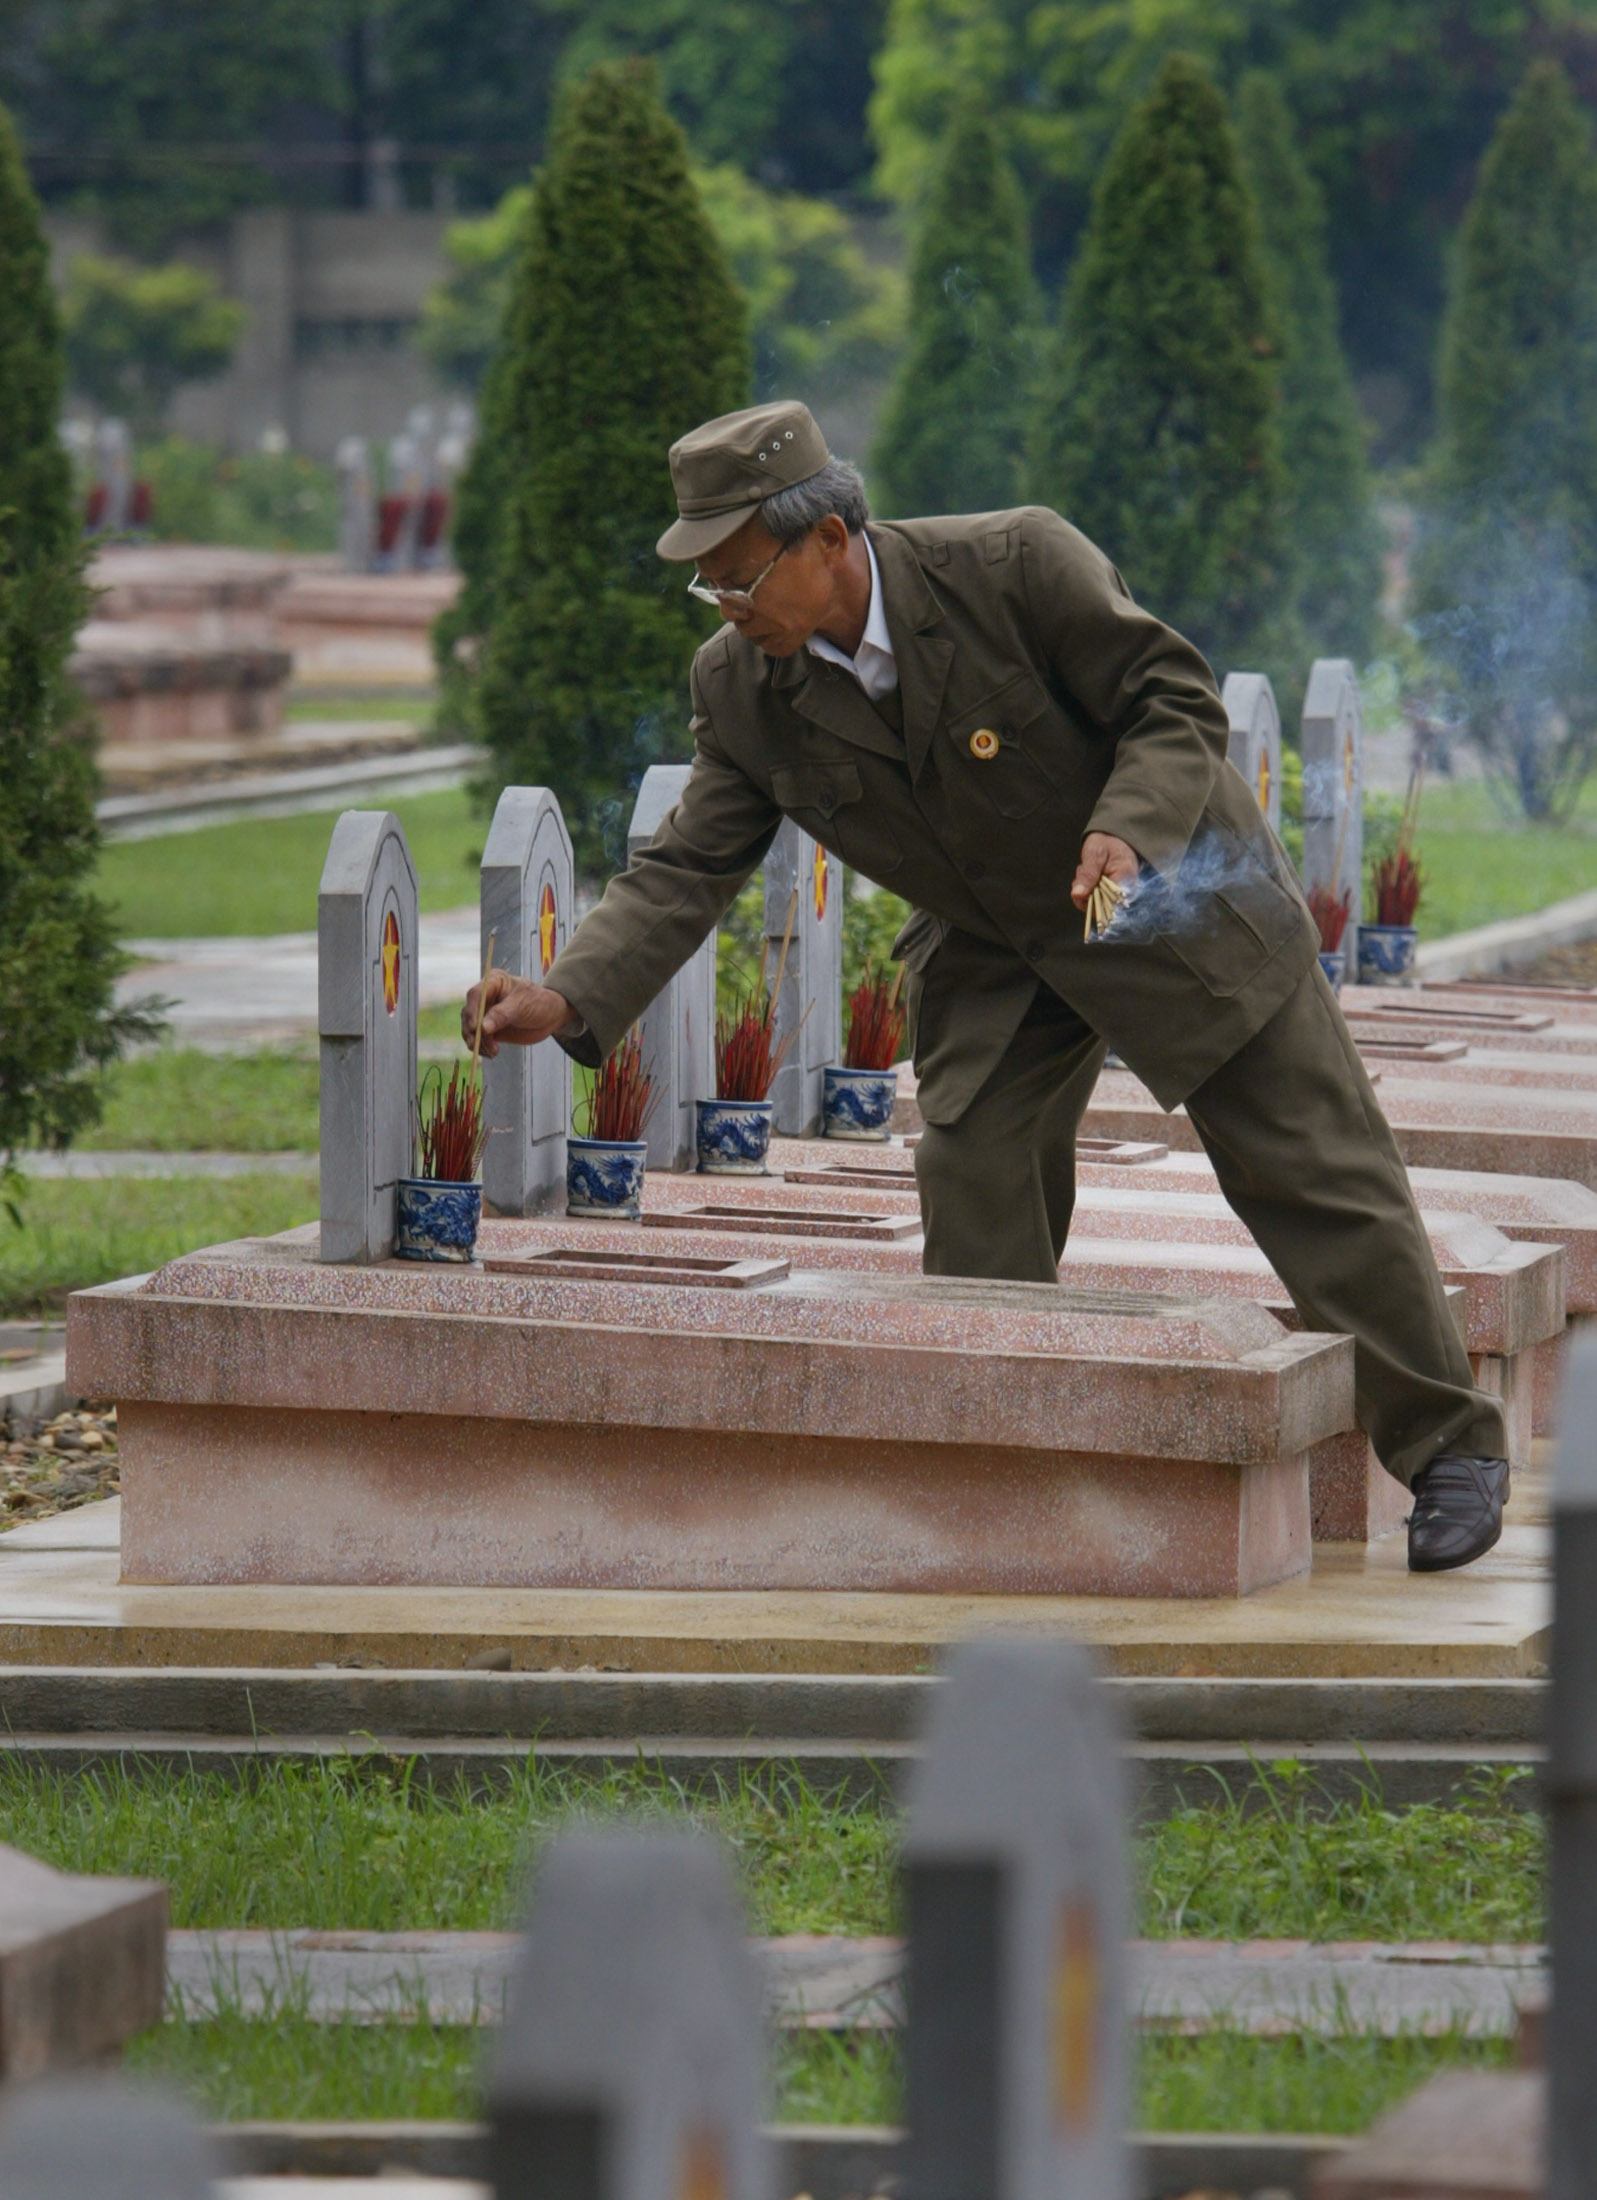 A Vietnamese war veteran places incense on graves of soldiers who died fighting the French in the historic city of Dien Bien Phu May 5, 2004. Vietnam is gearing up to commemorate the May 7, 1954 anniversary when Viet Minh forces overran the French garrison at Dien Bien Phu after a 56-day seige, forcing the French government to abandon its colonial control of Indochina. REUTERS/Bob Strong